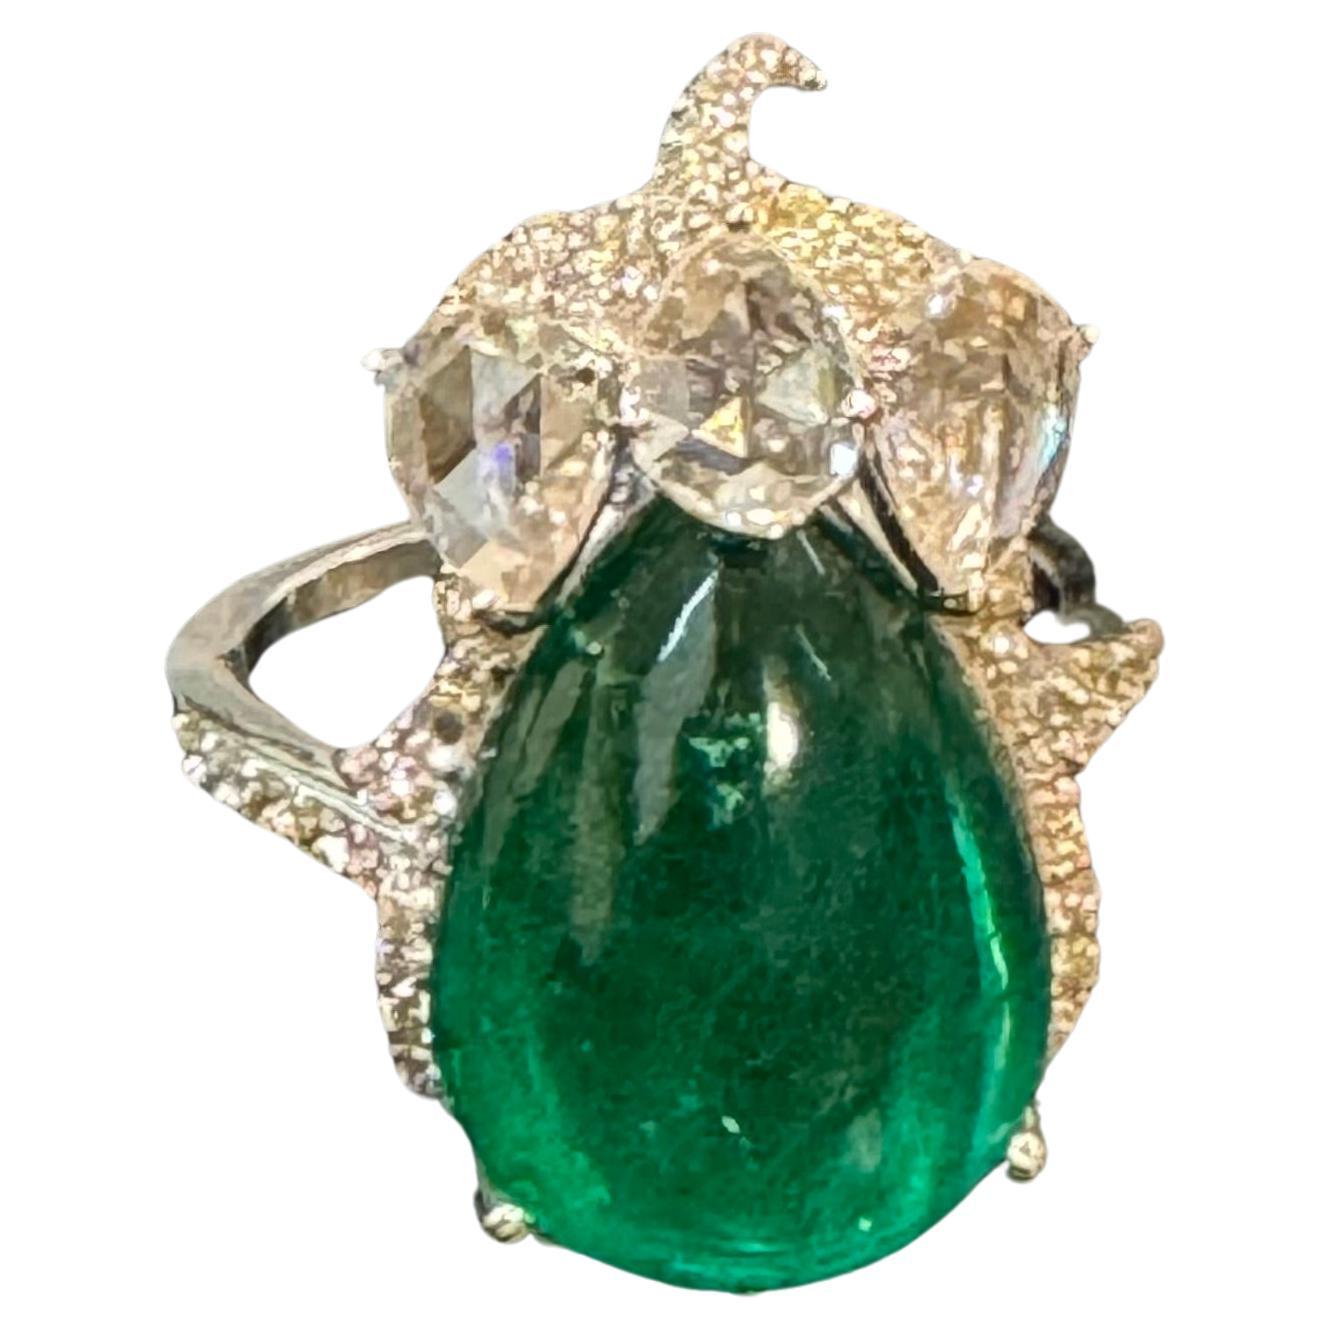 9 Ct Finest Zambian Sugar Loaf Pear Shape Emerald & 2 Ct Rose Cut Diamond Ring, Size 7, is a classic piece of jewelry showcasing a pear-shaped sugar loaf emerald from Zambia with exceptional color, quality, and luster. The emerald is complemented by